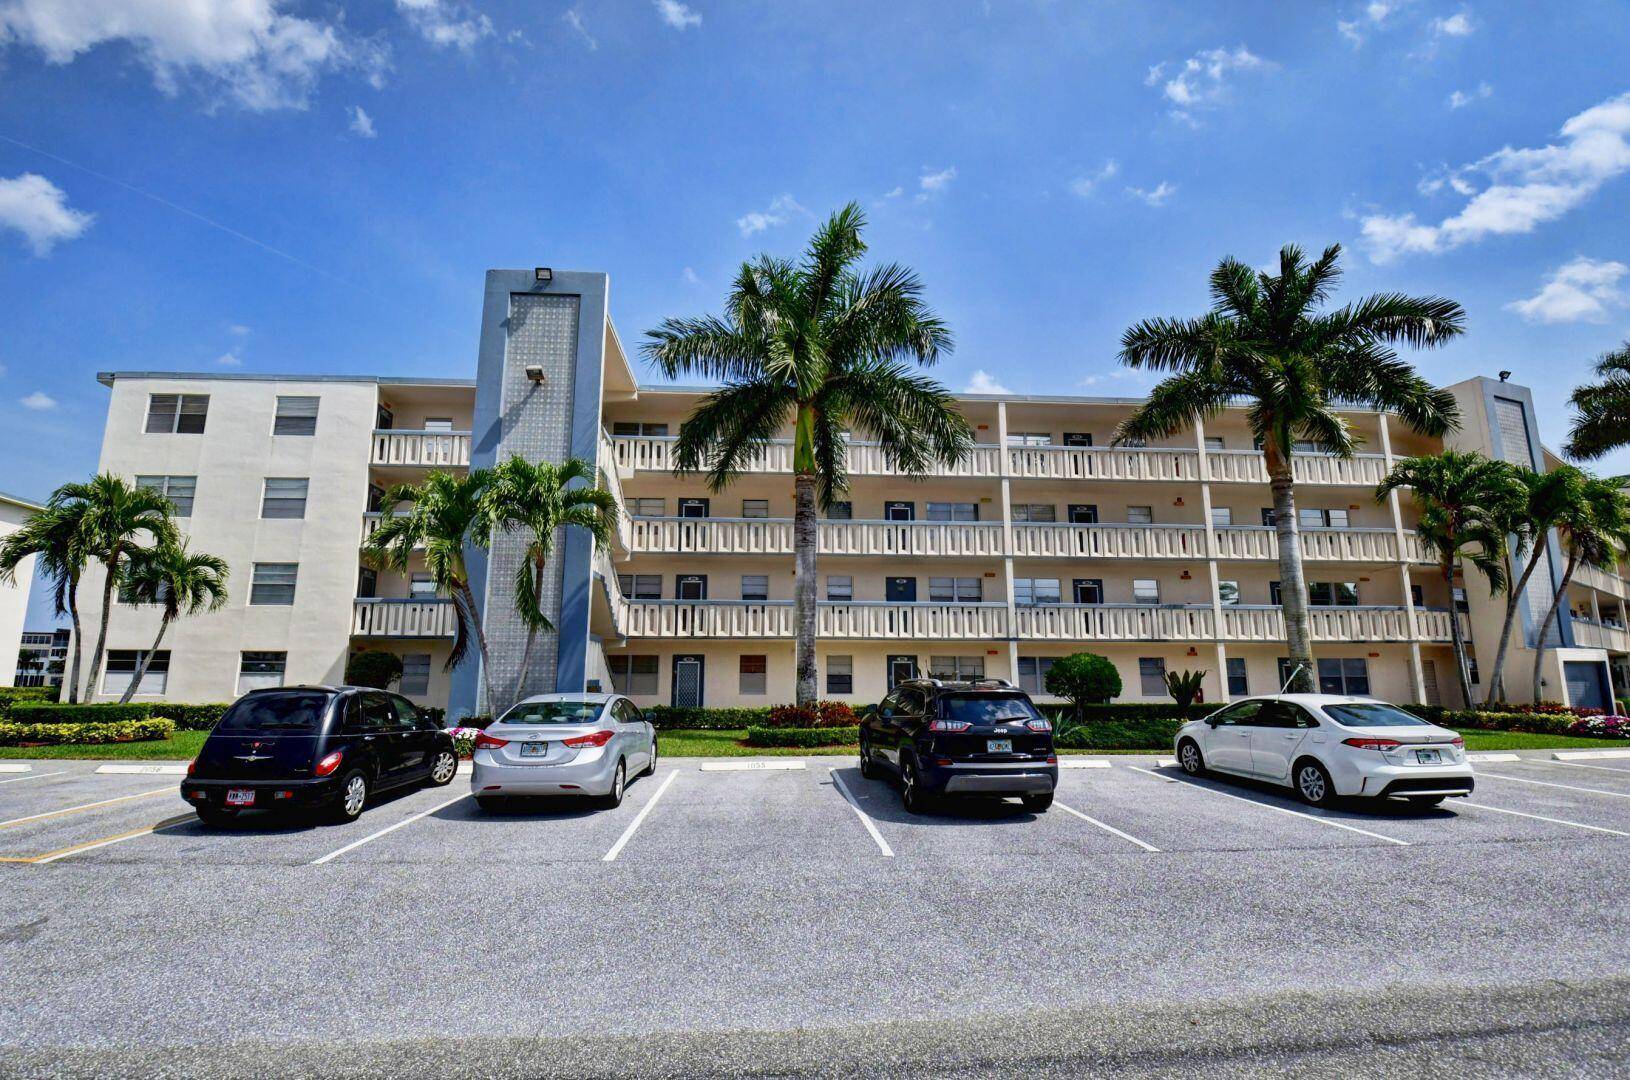 2 2, 3rd floor, Furnished, tile throughout, updated kitchen with extra cabinets, updated master bathroom, master bedroom has door going out to patio, enclosed patio with sliding windows overlooking magnificent ...